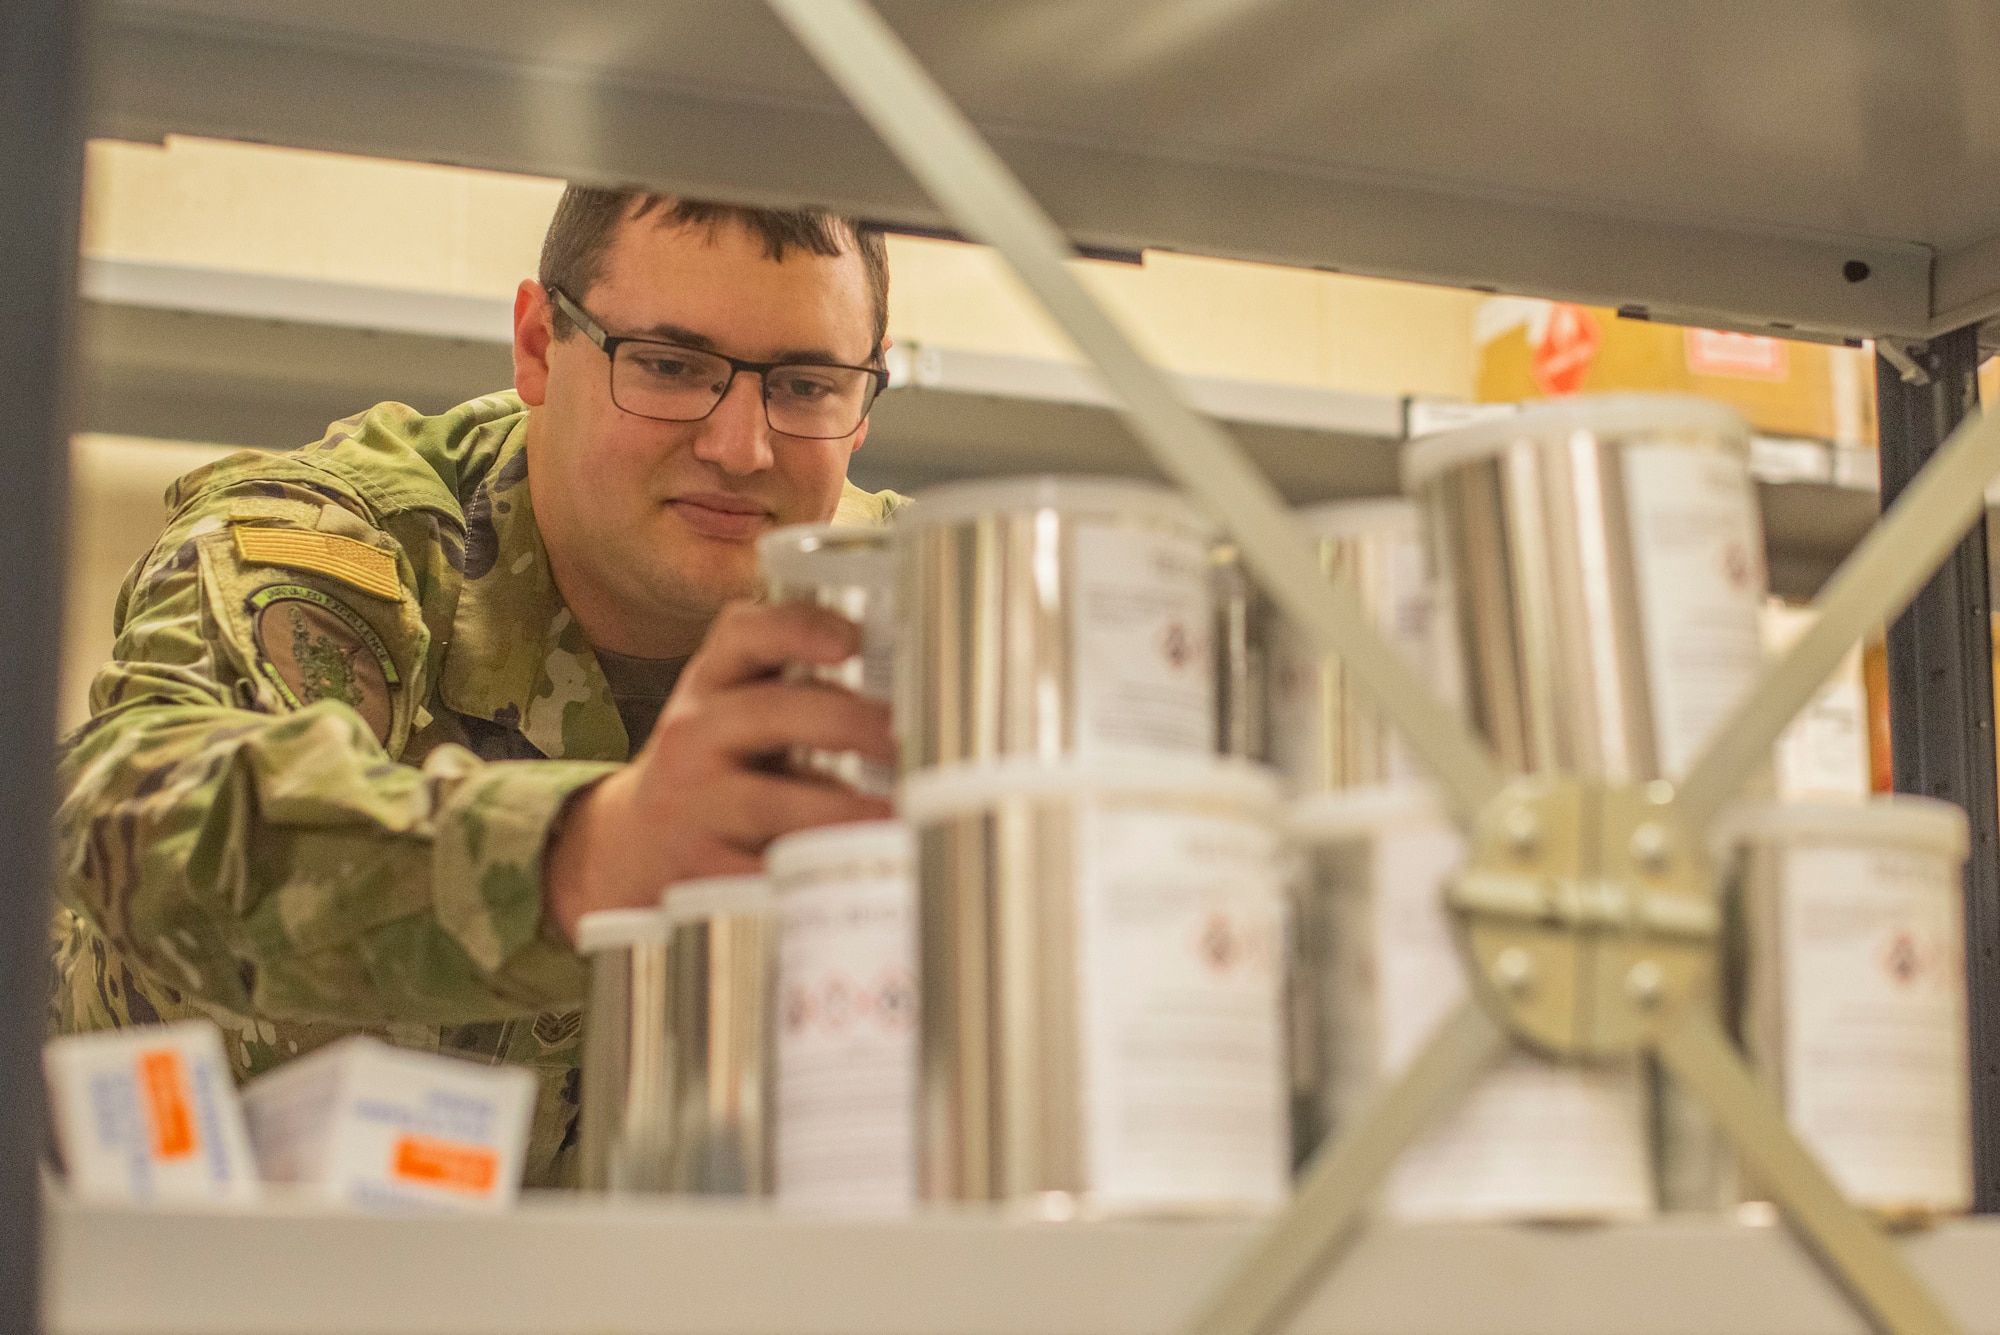 Staff Sergeant Nicholas Tendam, 100th Logistics Readiness Squadron assistant noncommissioned officer in charge of hazmart, stacks cans of corrosion prevention fluid Oct. 28, 2019, at RAF Mildenhall, England. Materials are separately stored at the hazmart pharmacy according to the hazard they present. (U.S. Air Force photo by Airman 1st Class Joseph Barron)